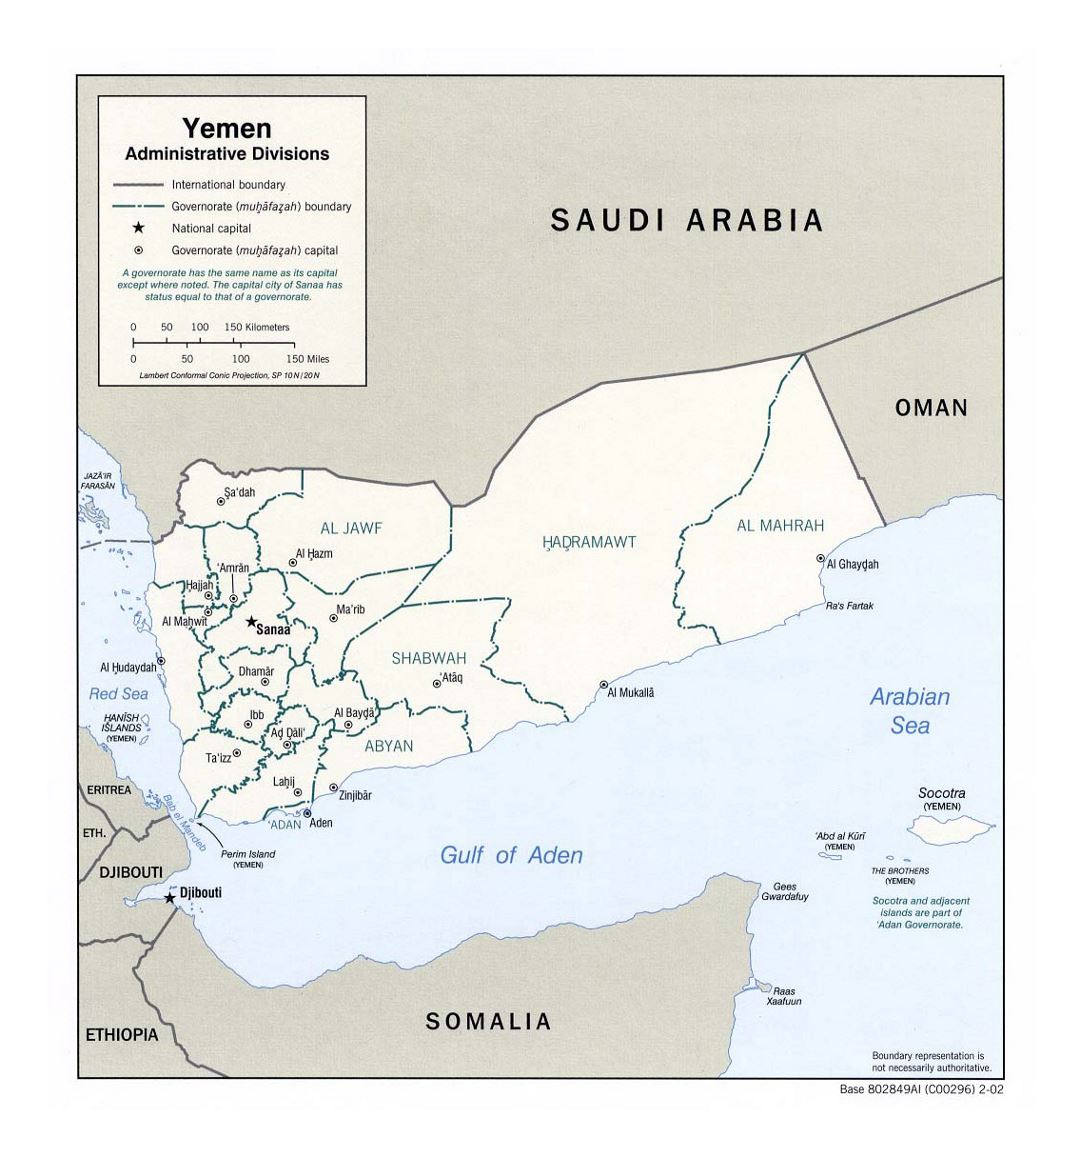 Detailed administrative divisions map of Yemen - 2002